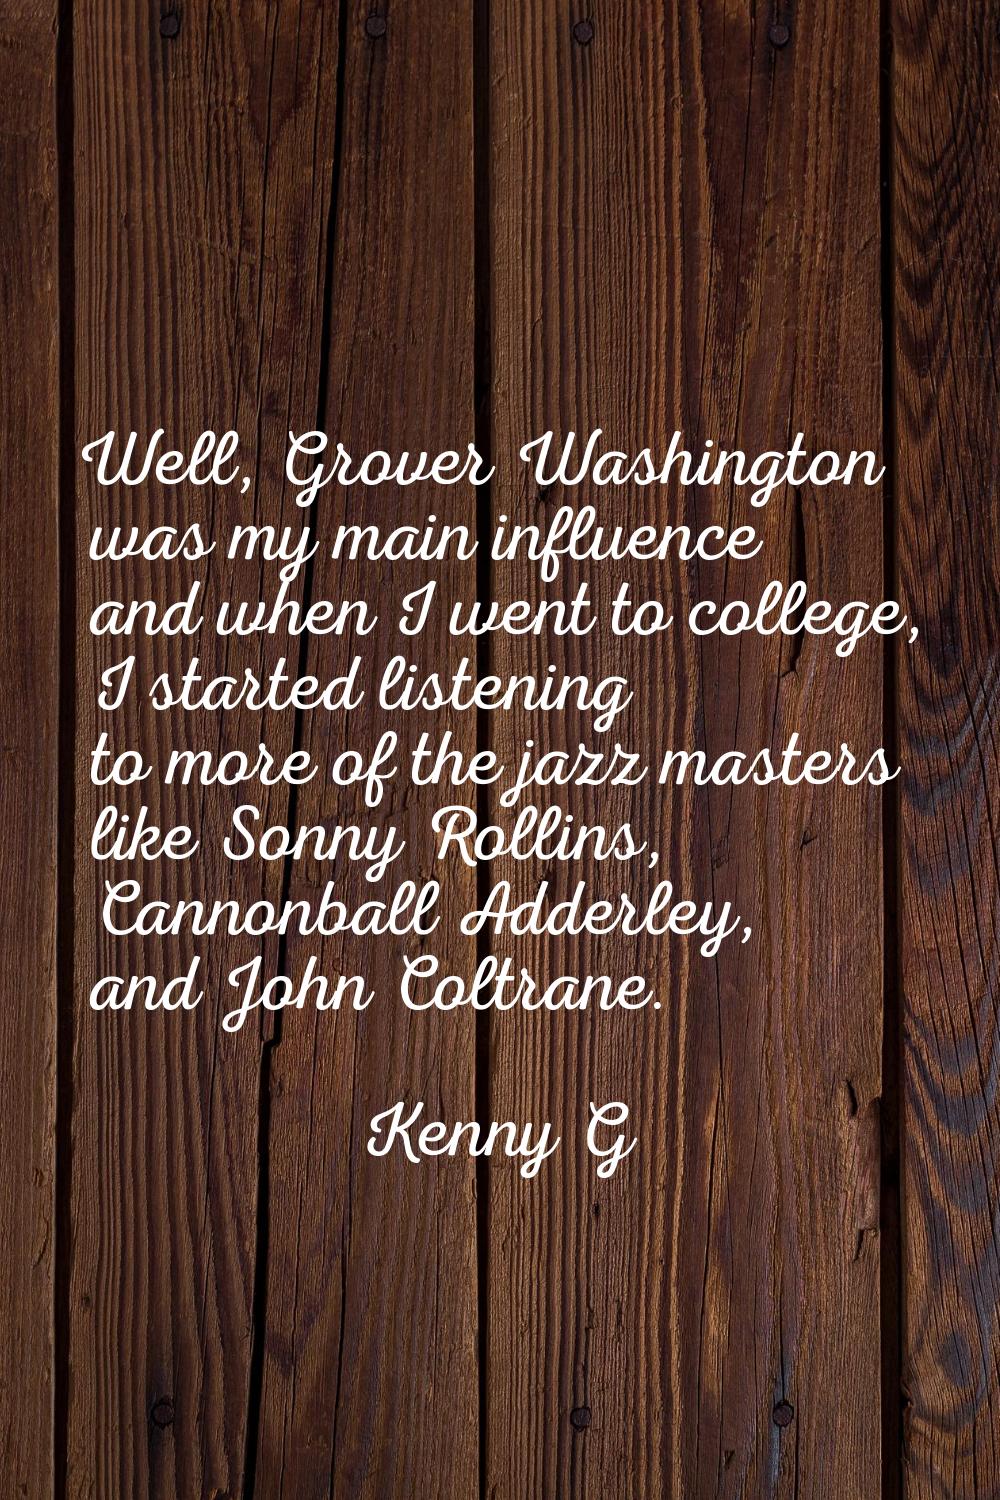 Well, Grover Washington was my main influence and when I went to college, I started listening to mo